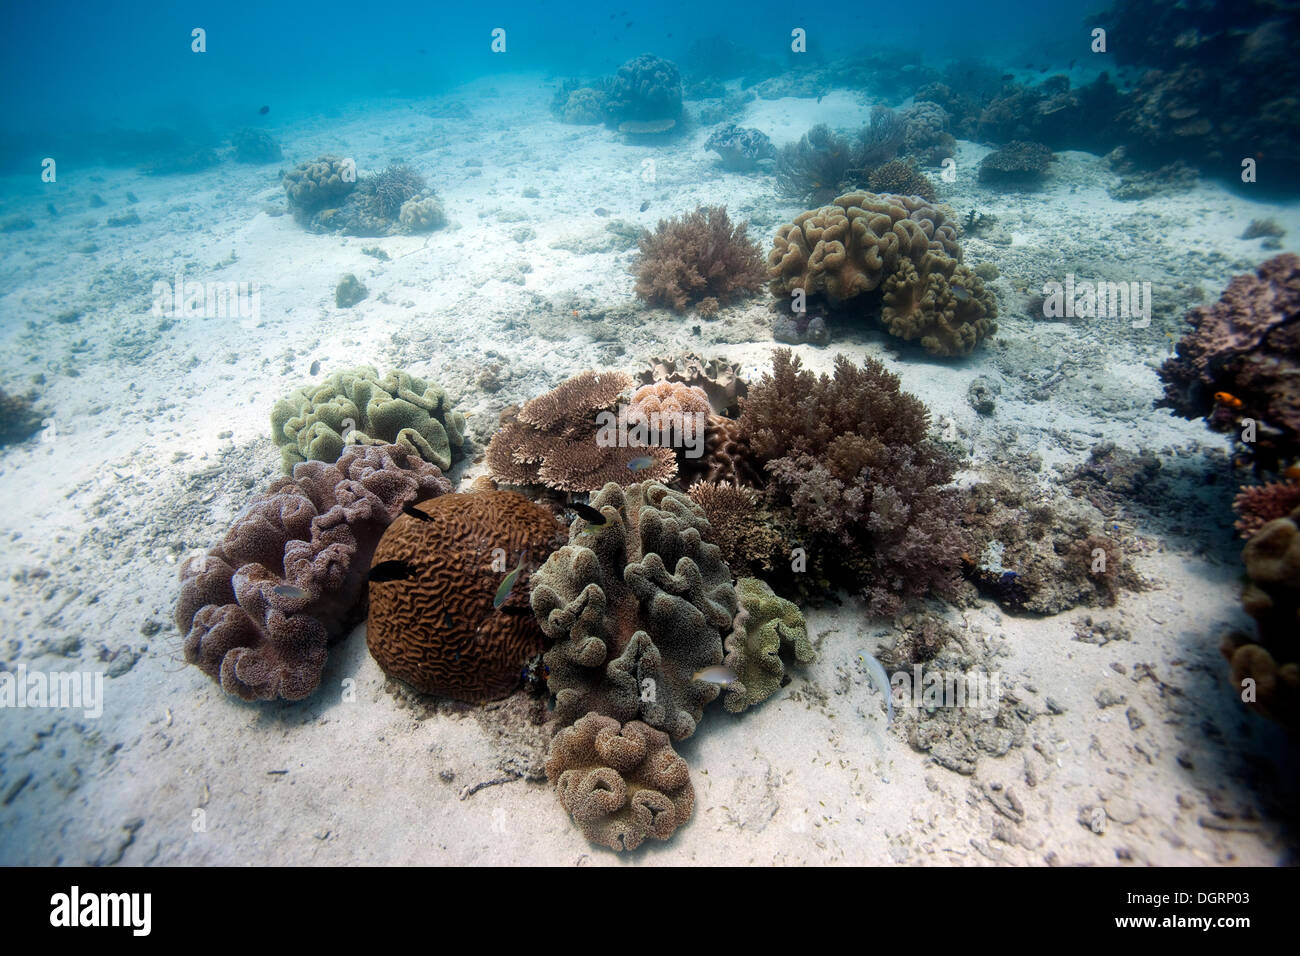 Sandy sea floor, partly covered with intact coral, Barriere Riff, Australia Stock Photo